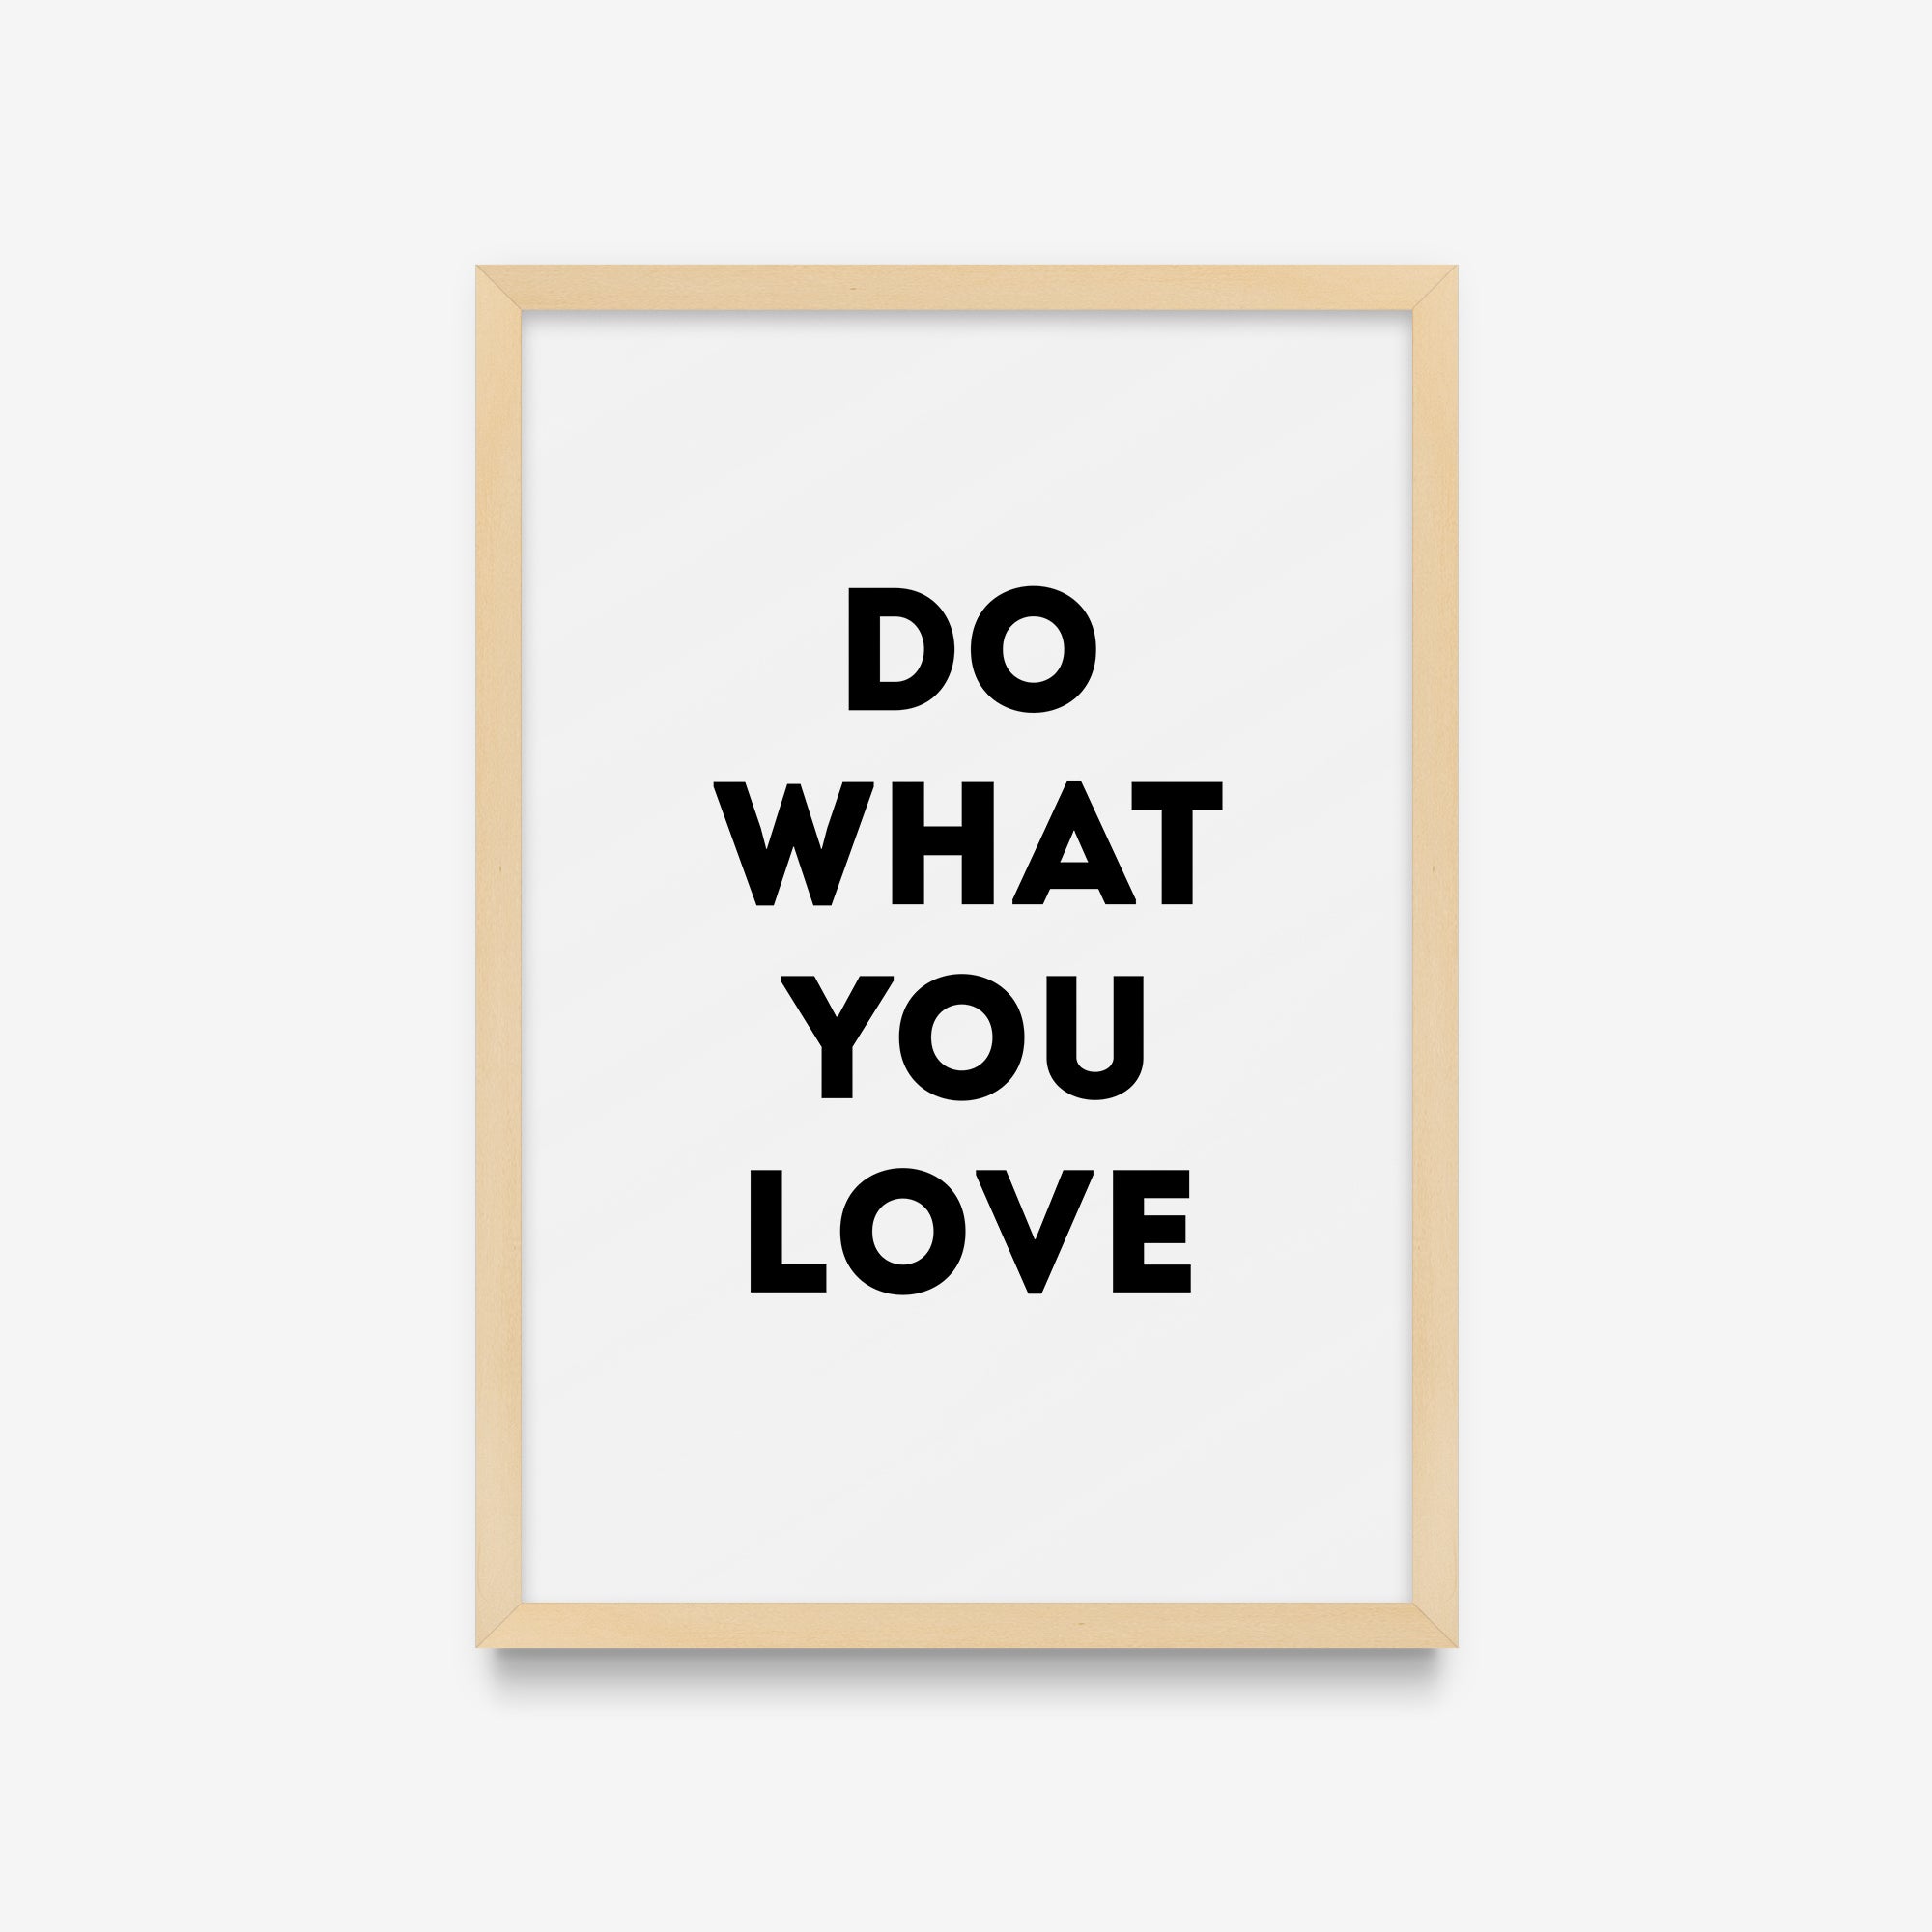 Frases - Do what you love